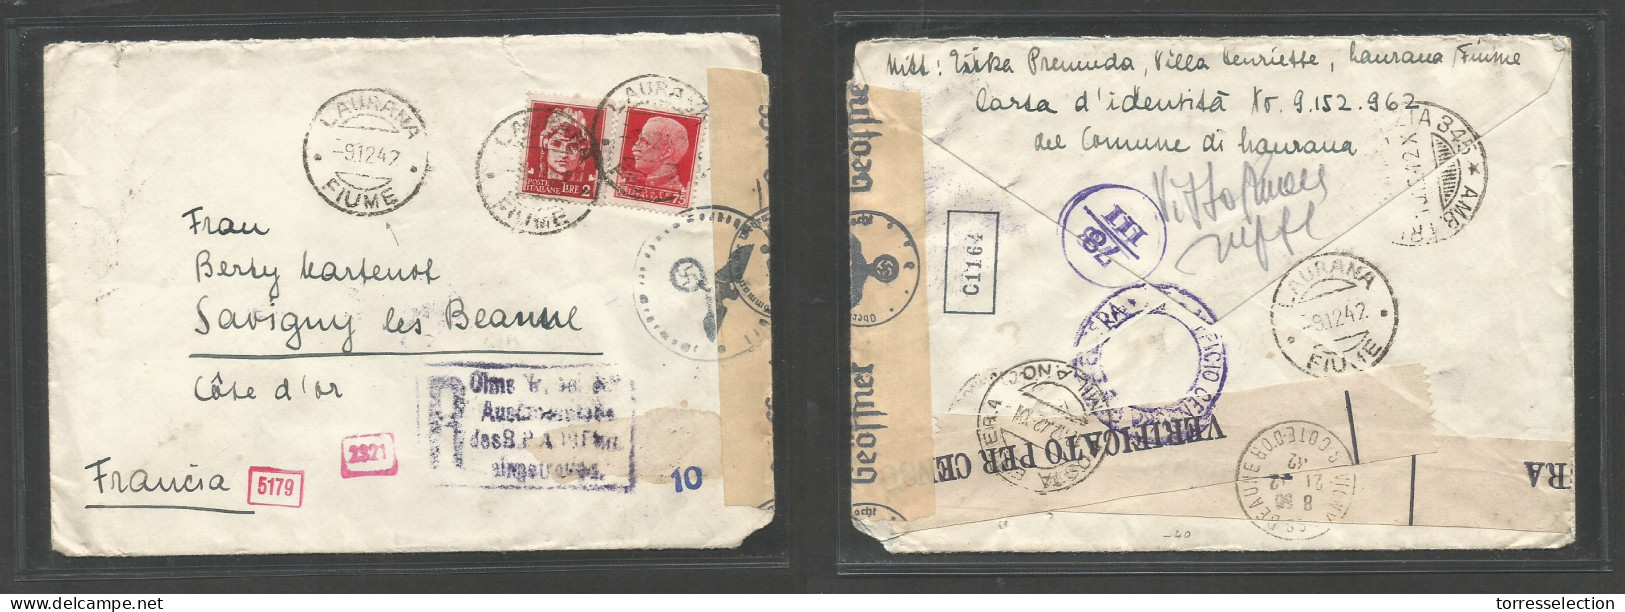 Italy - XX. 1942 (9 Dec) Laurana, Fiume - France, Savigny. Registered Censored WWII Multifkd Env, Front And Reverse. - Unclassified